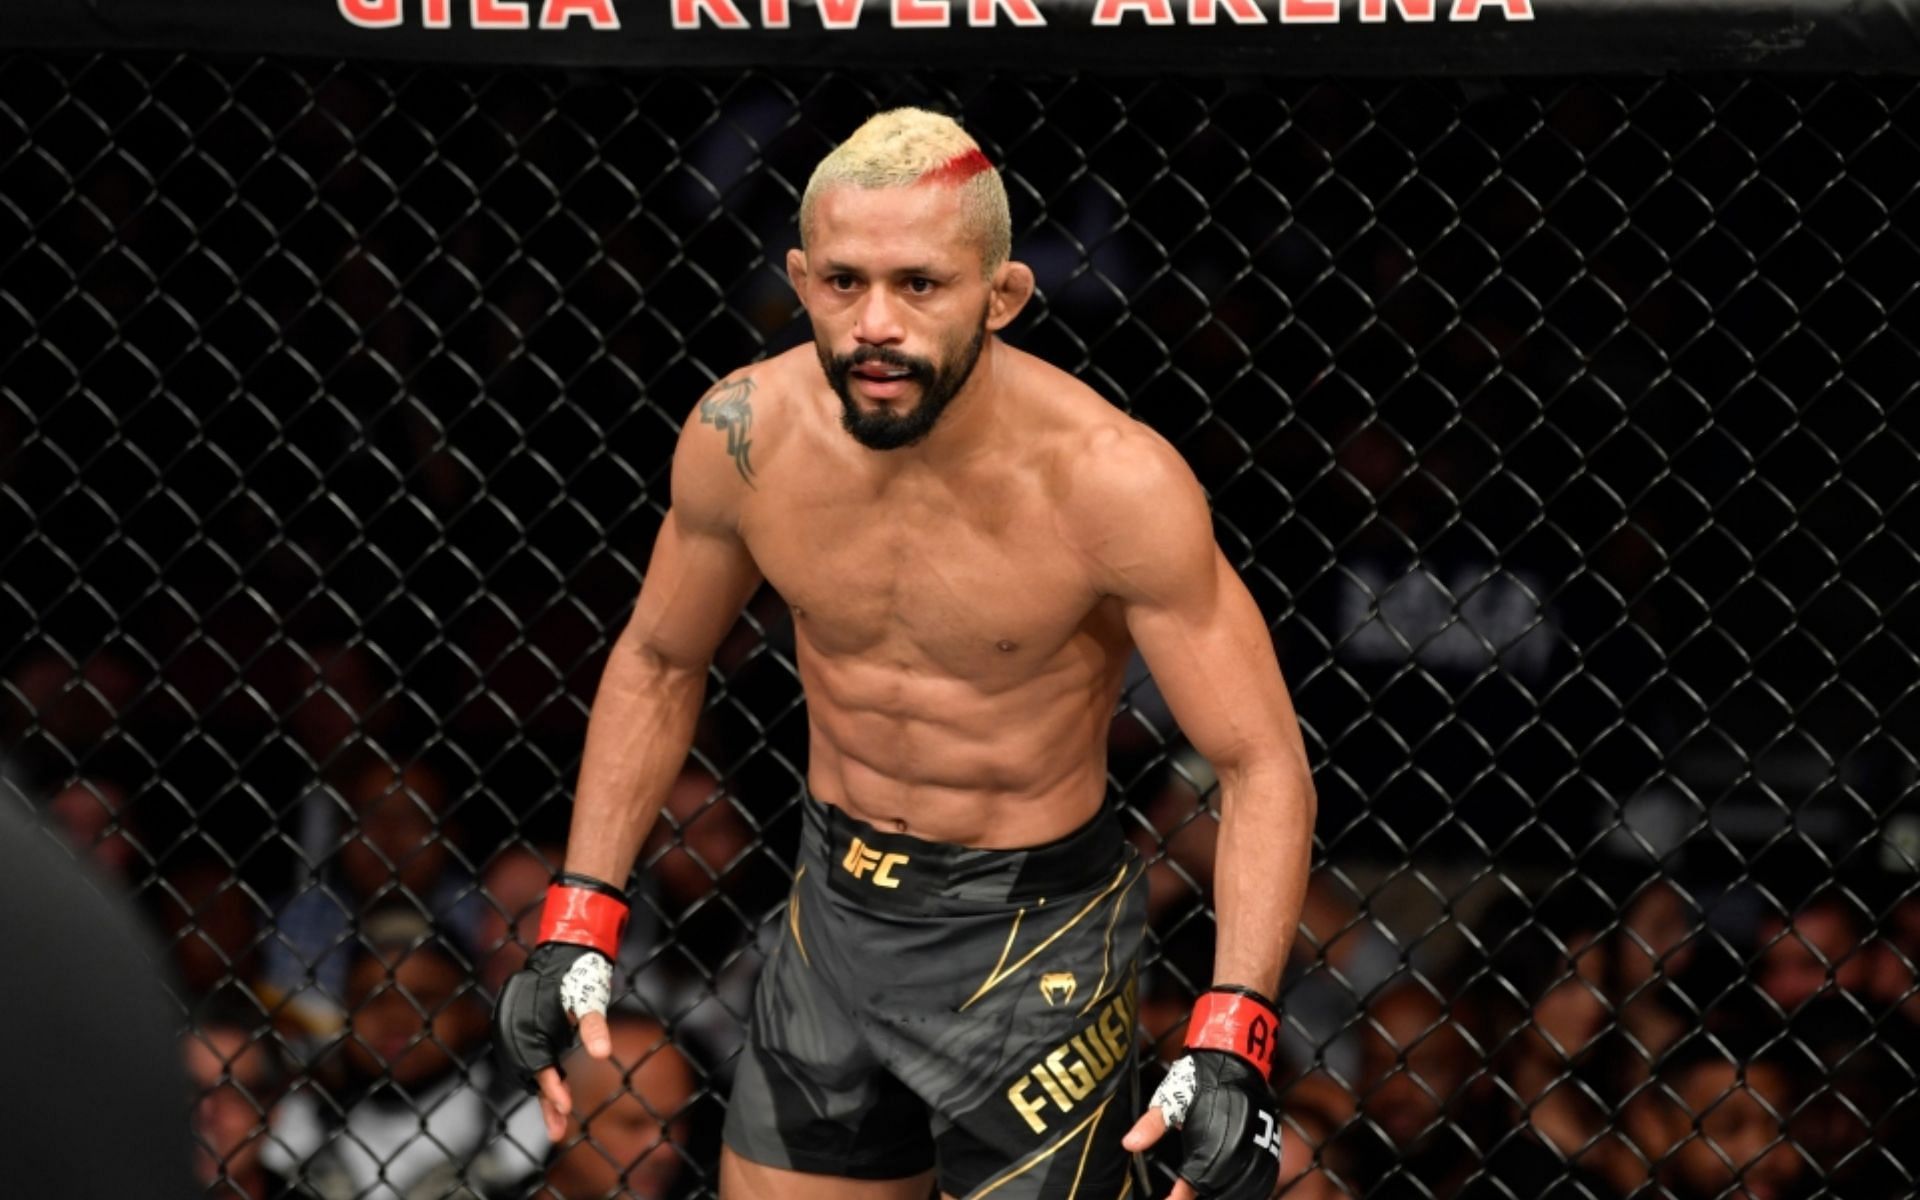 Deiveson Figueiredo might be ready to move to 135lbs, but who should he face if he does?